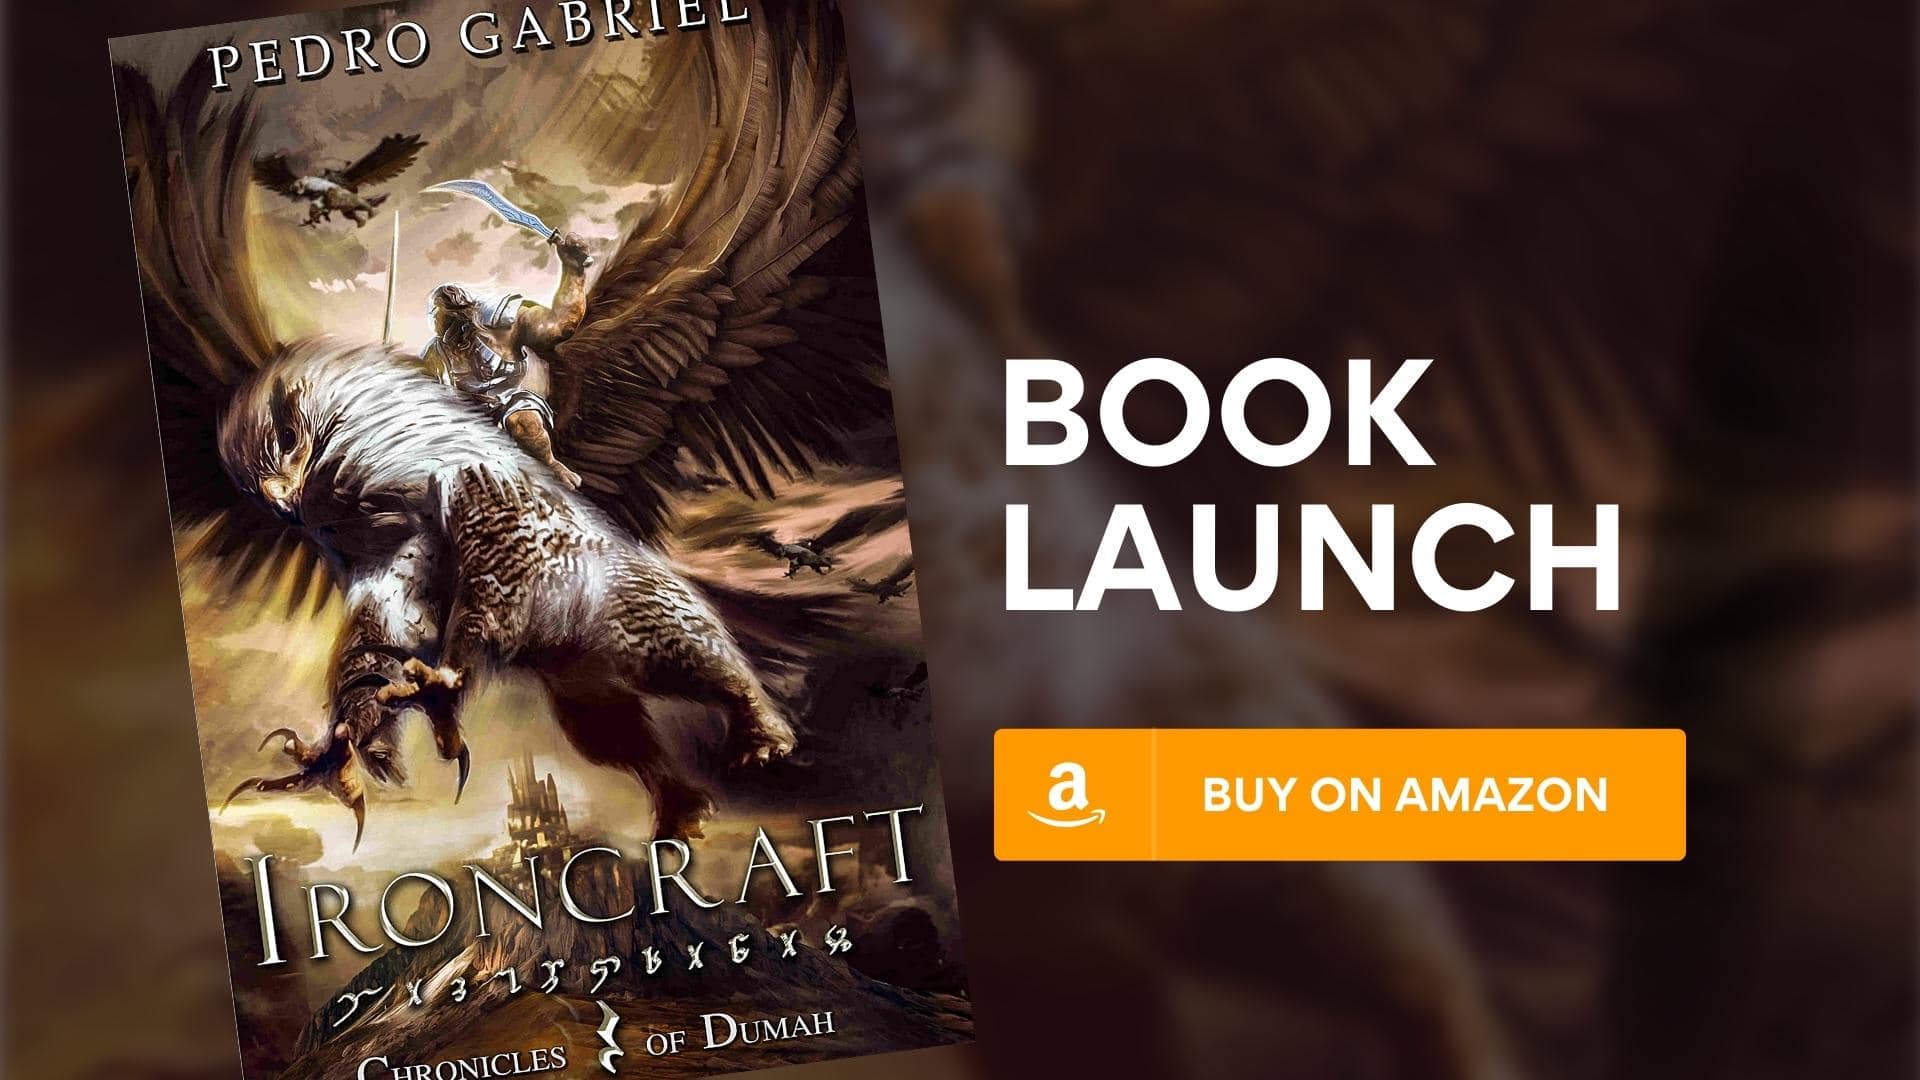 The Chronicles of Dumah: Ironcraft Book Launch | Pedro Gabriel